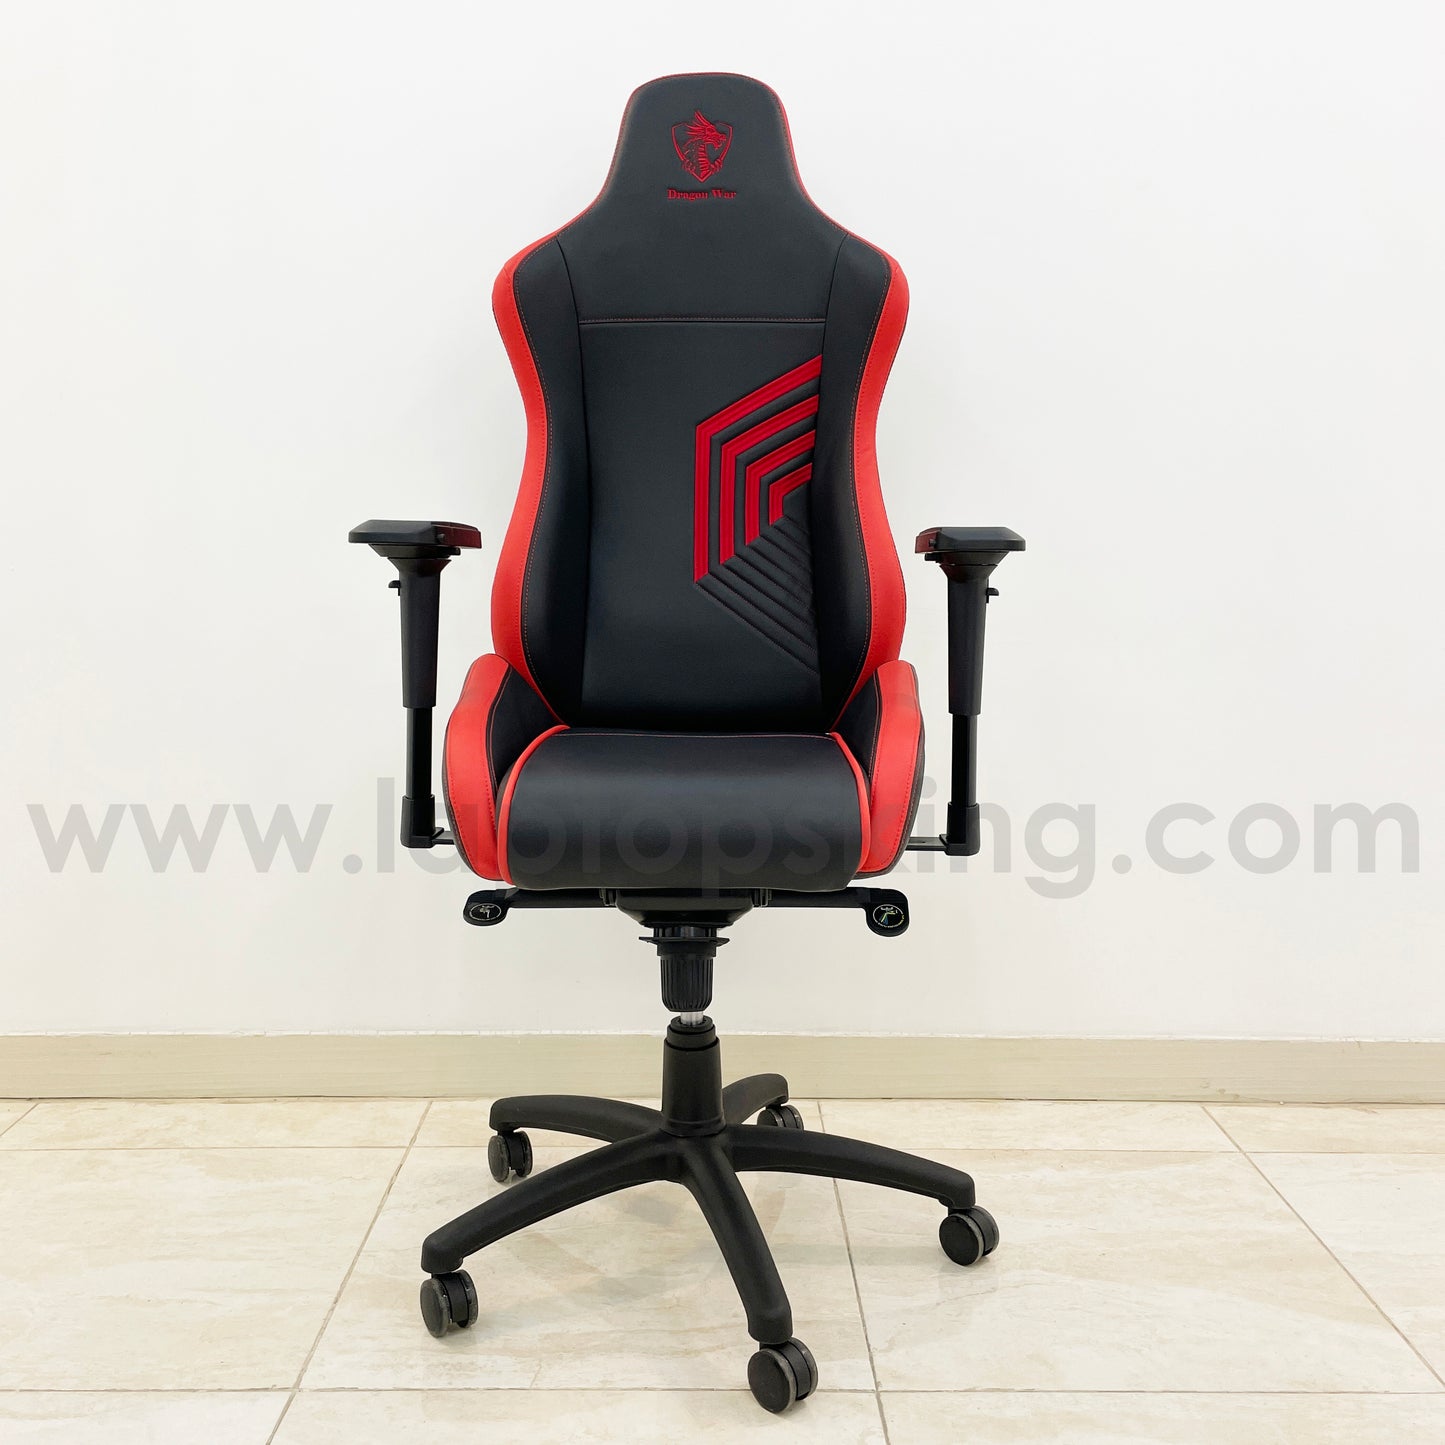 Dragon War DK-868 Red Edition High Quality Gaming Chair Offer (Brand New)